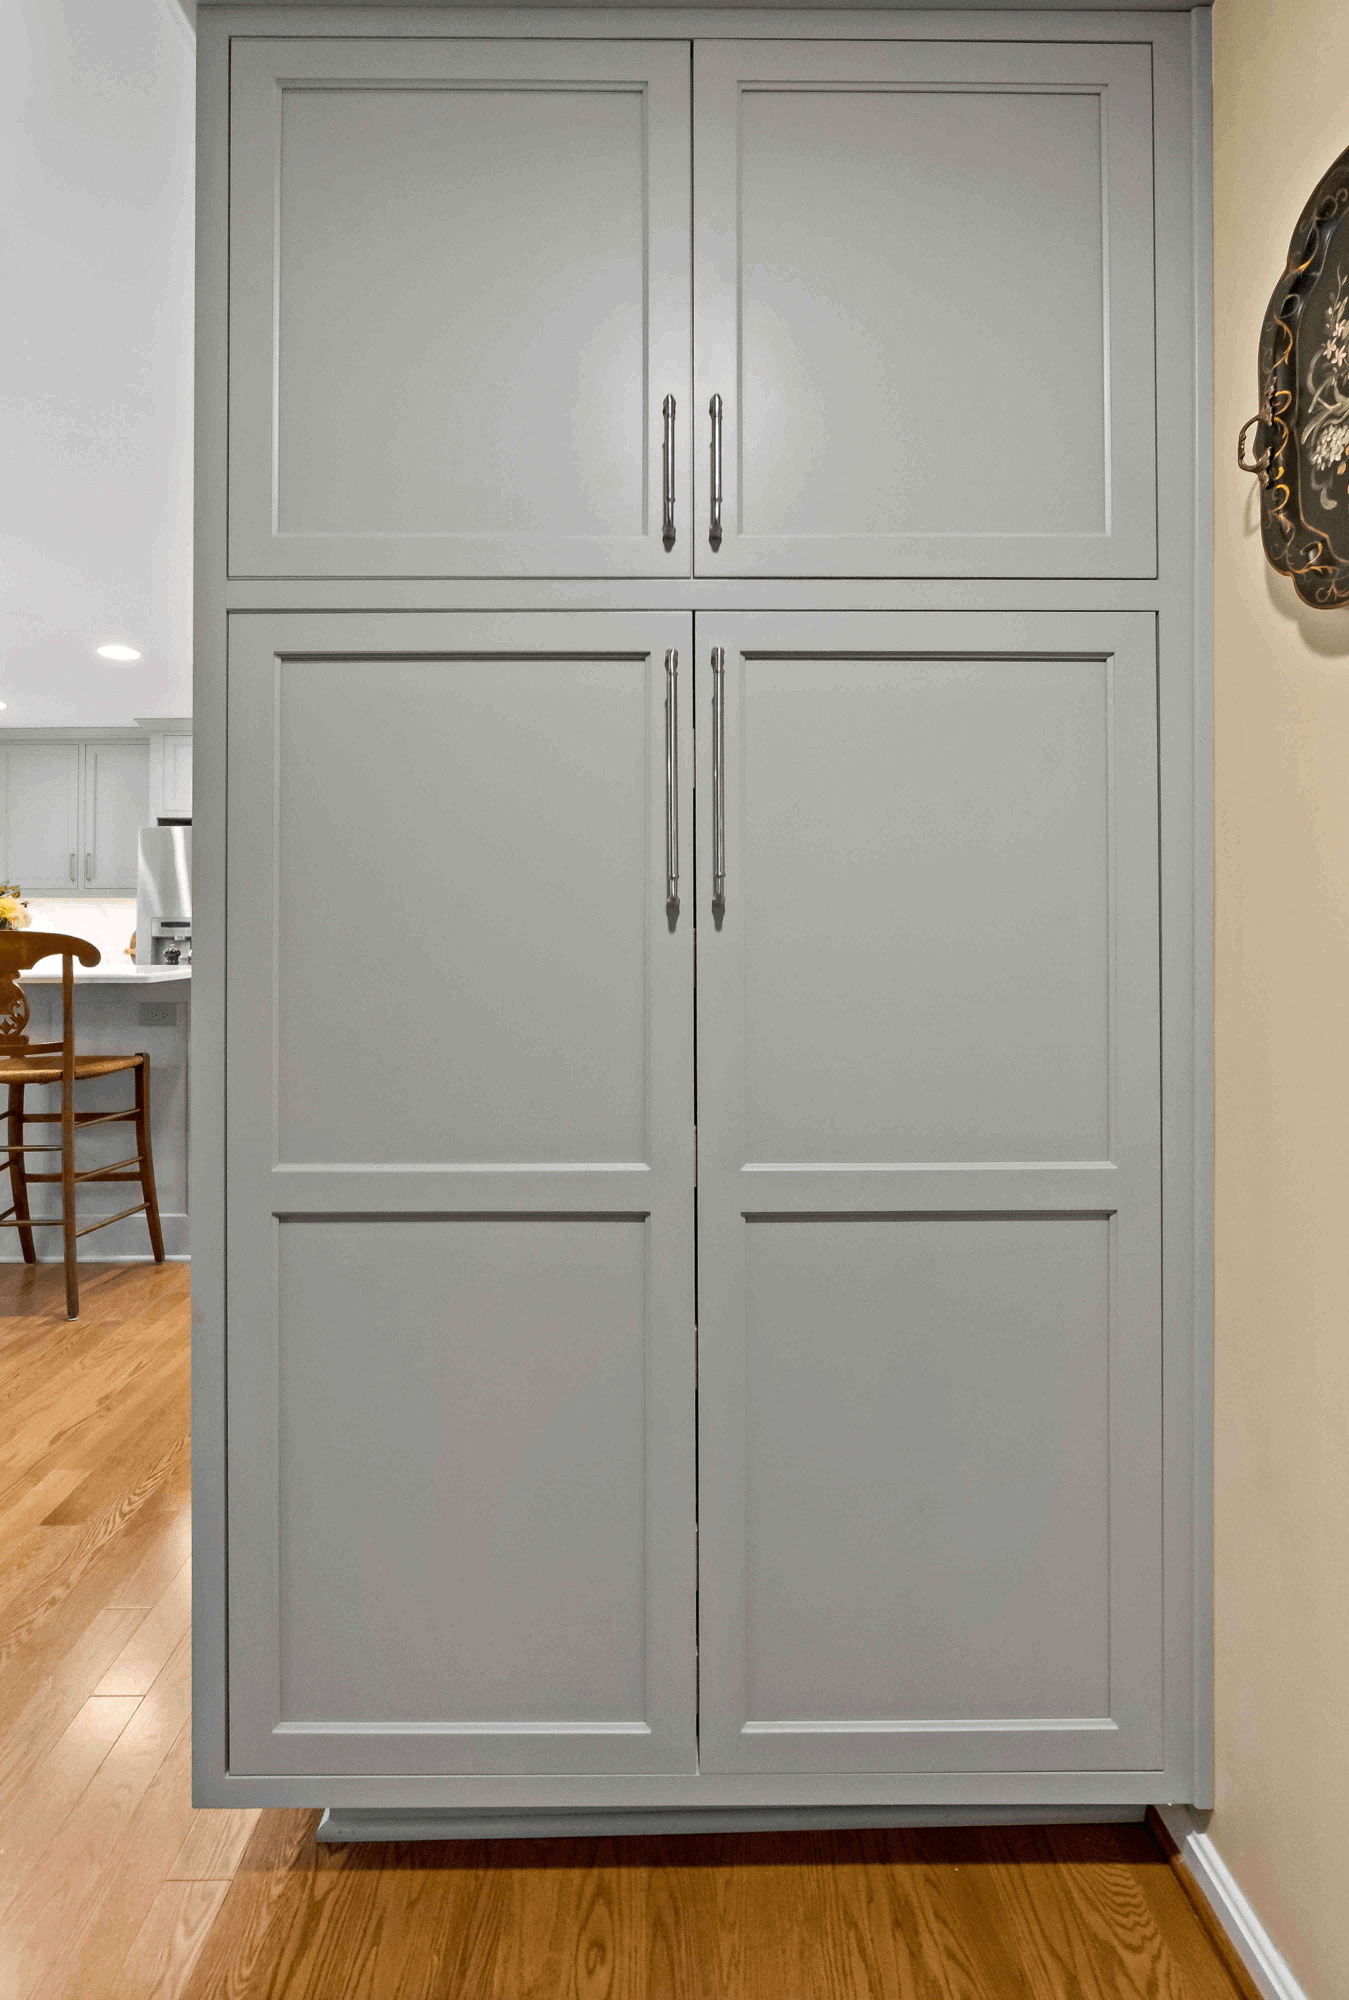 Grey cabinets with grey handles in kitchen